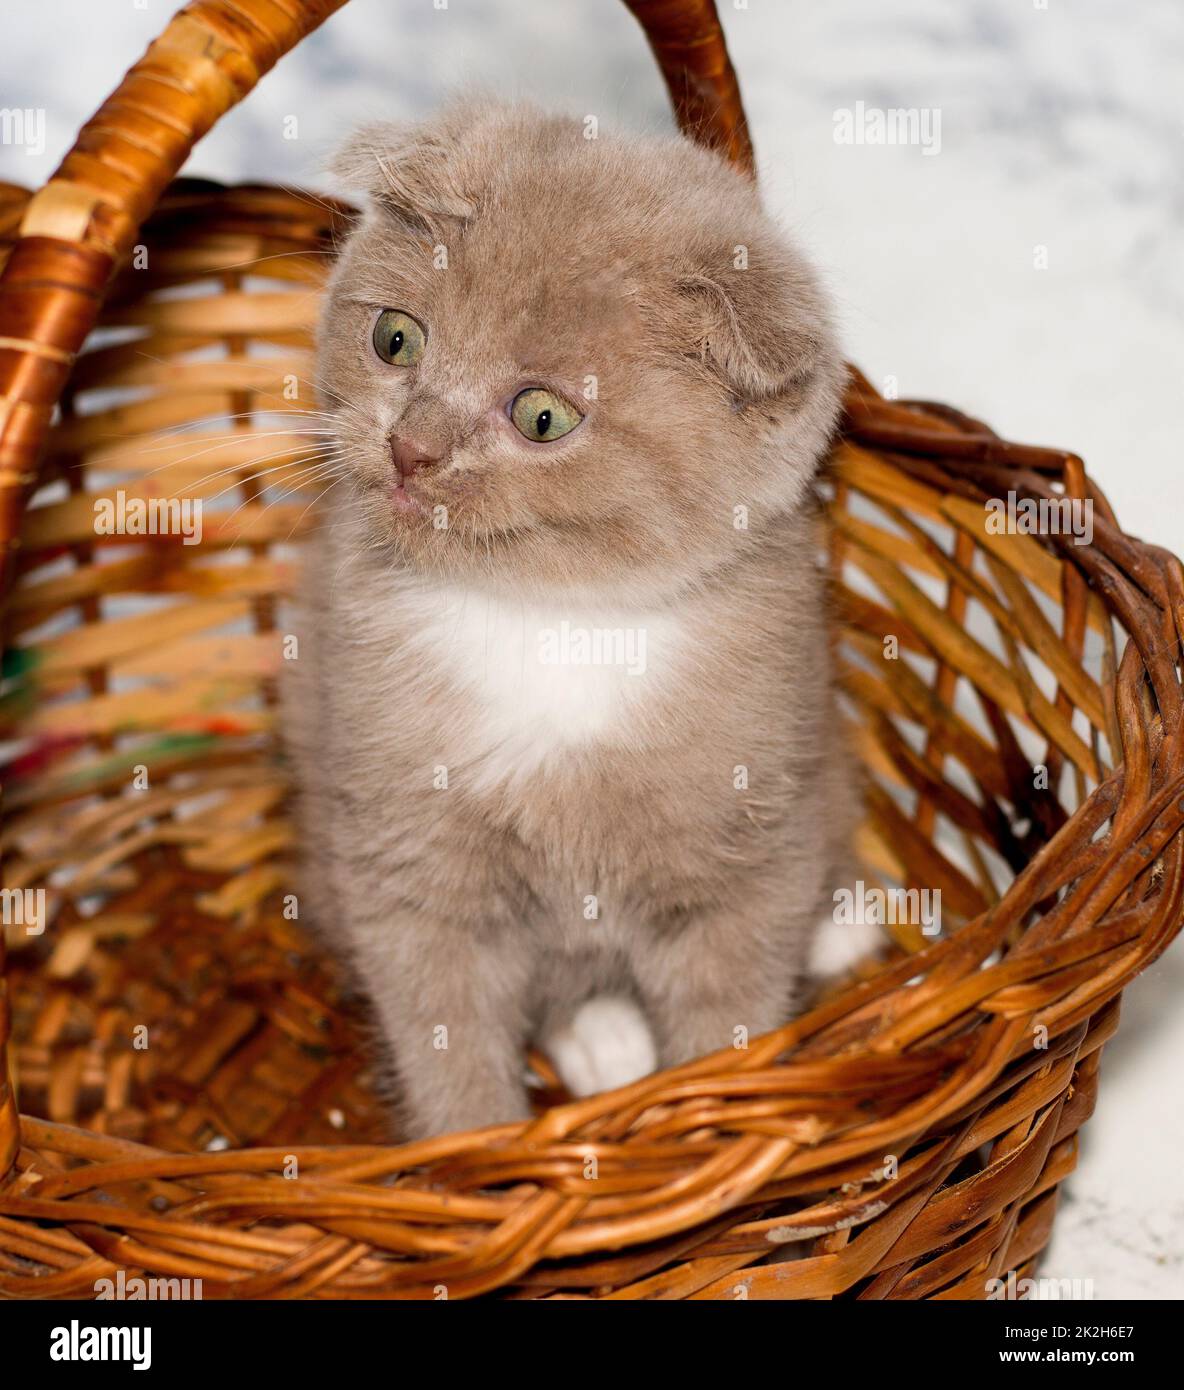 close-up fold bicolor lilac Scottish kitten sitting in a wicker basket Stock Photo